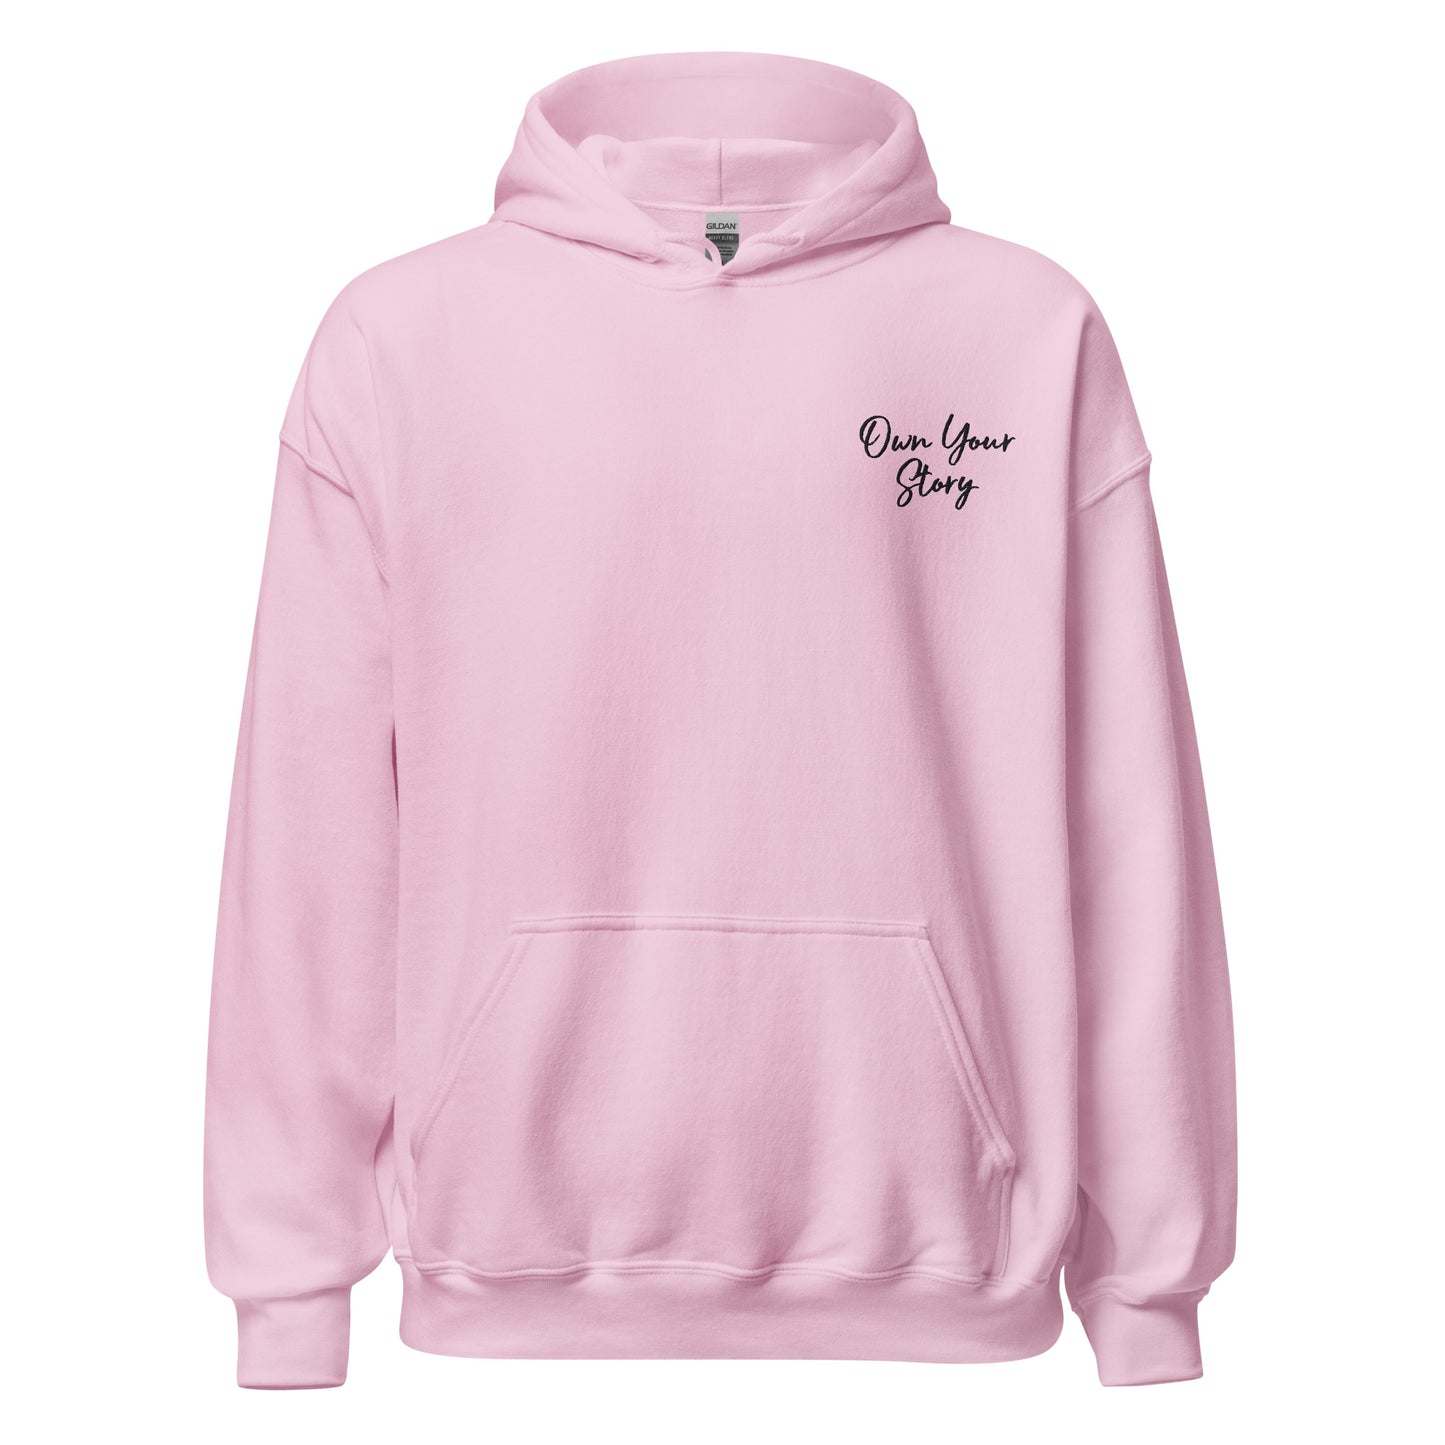 Embroidered Own Your Story Hooded Sweatshirt